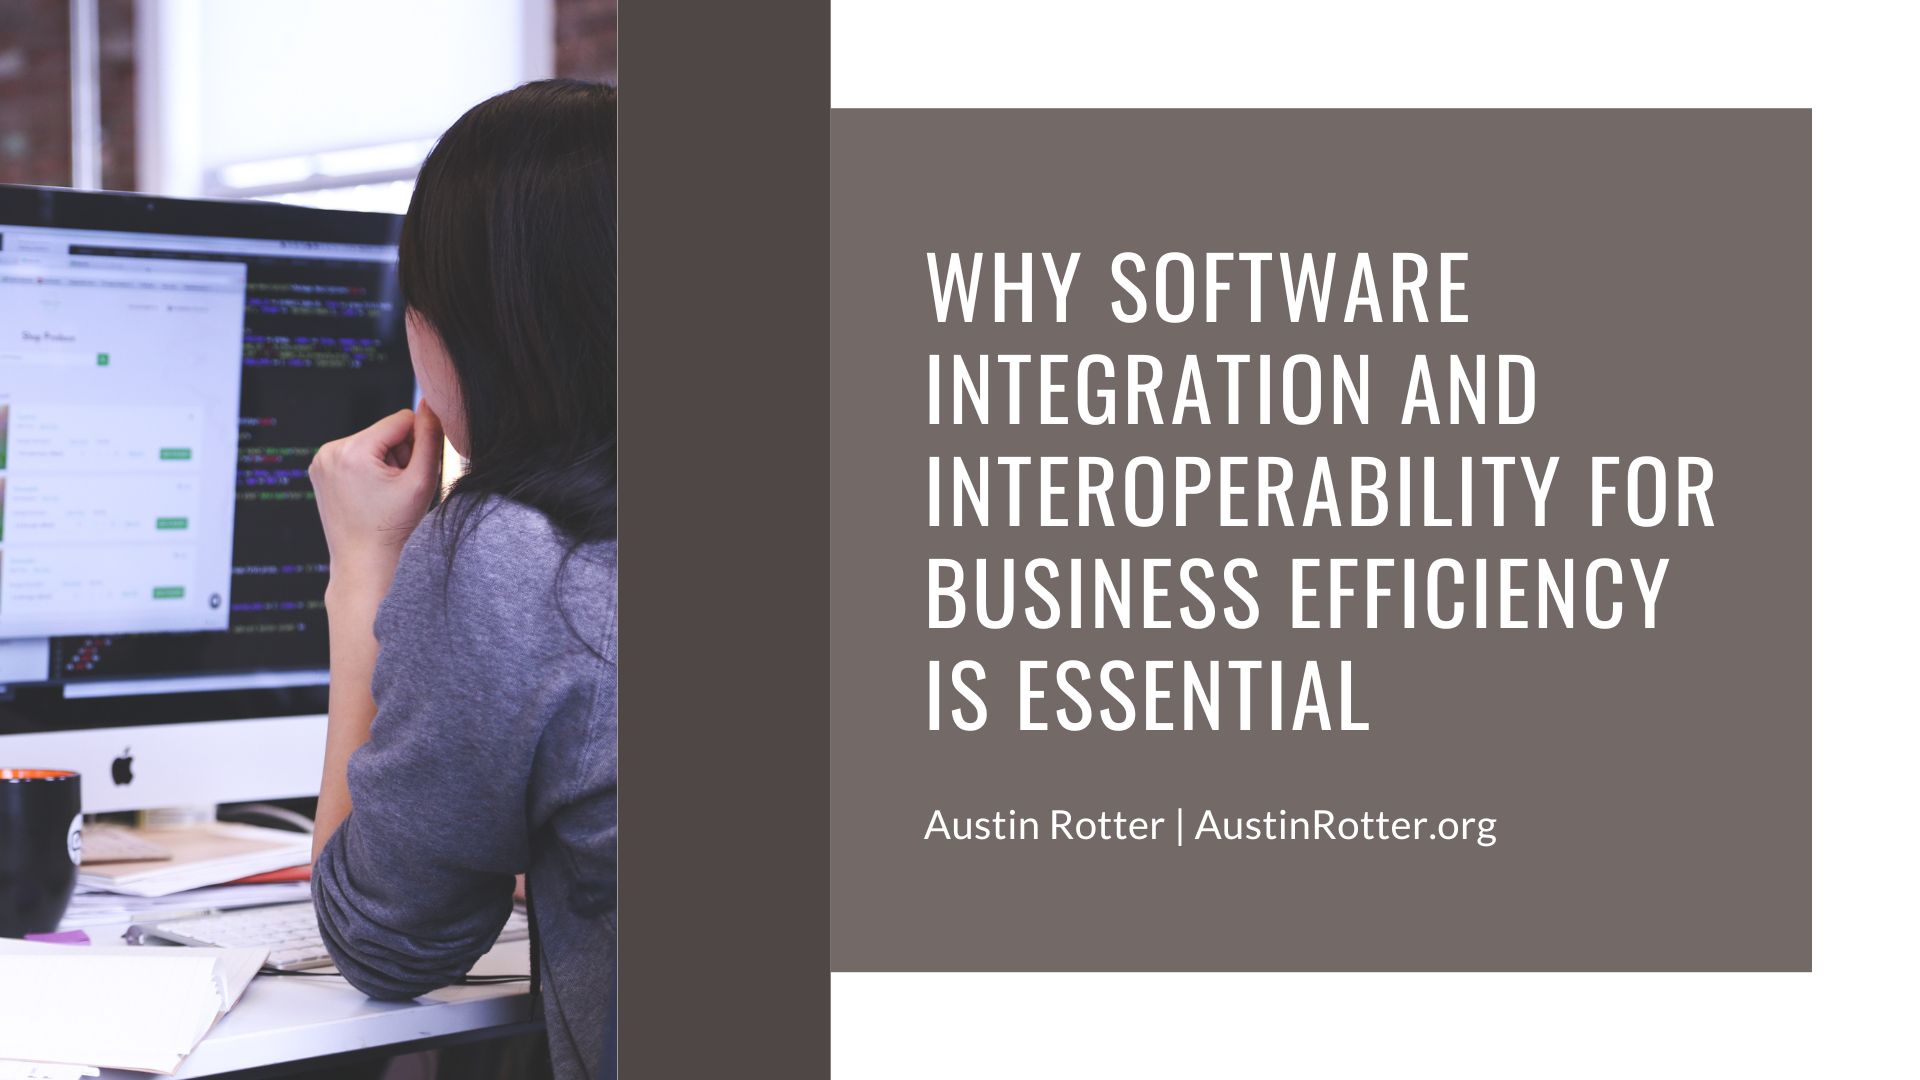 WHY SOFTWARE
REN)
INTEROPERABILITY FOR
BUSINESS EFFICIENCY
IS ESSENTIAL

Austin Rotter | AustinRotter.org